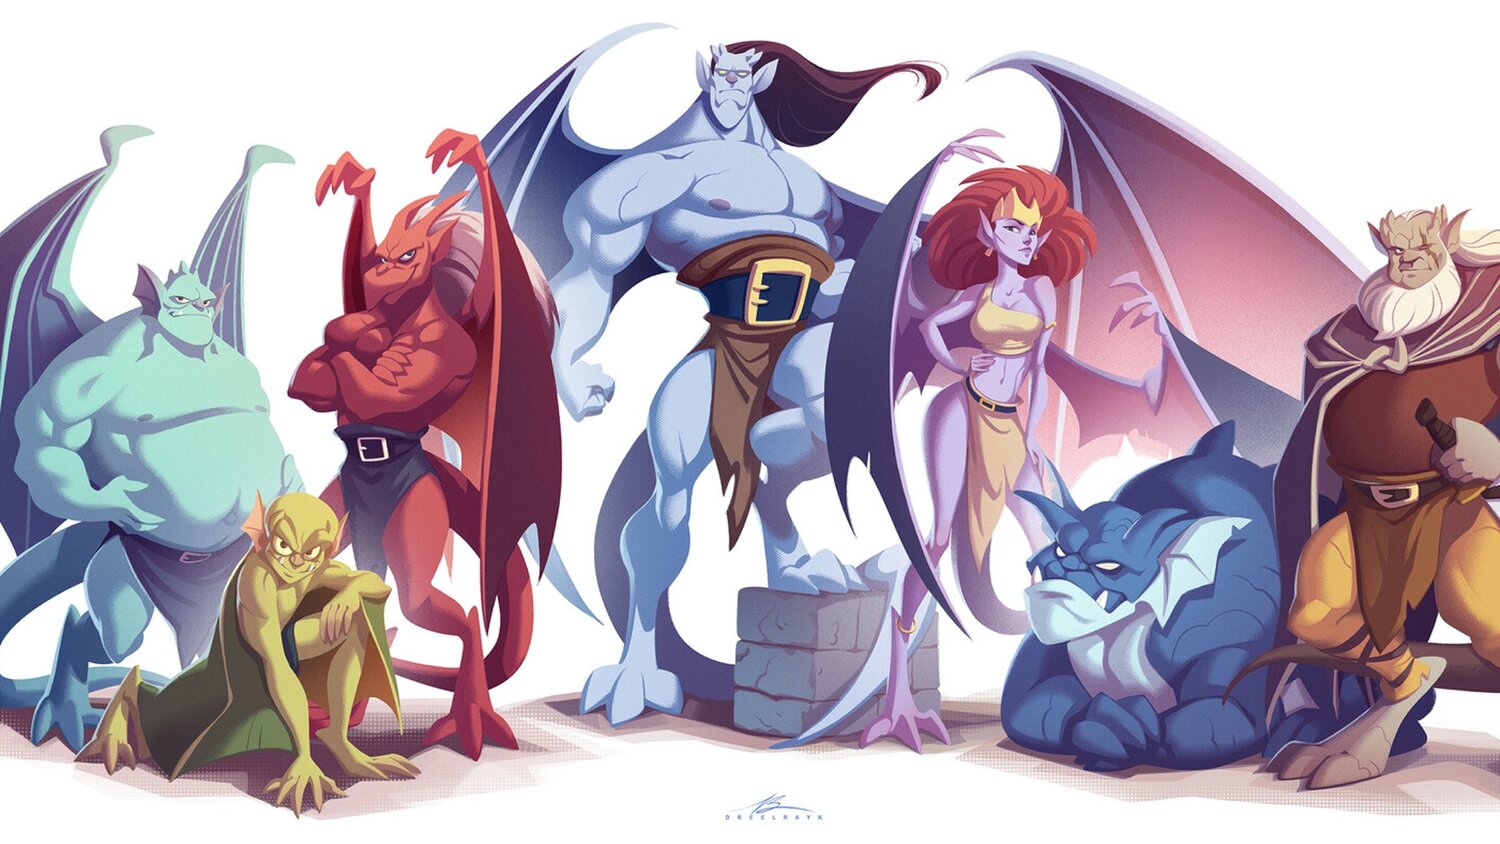 Cool Fan Art For GARGOYLES and STAR WARS Created By Valerio "Dreel...